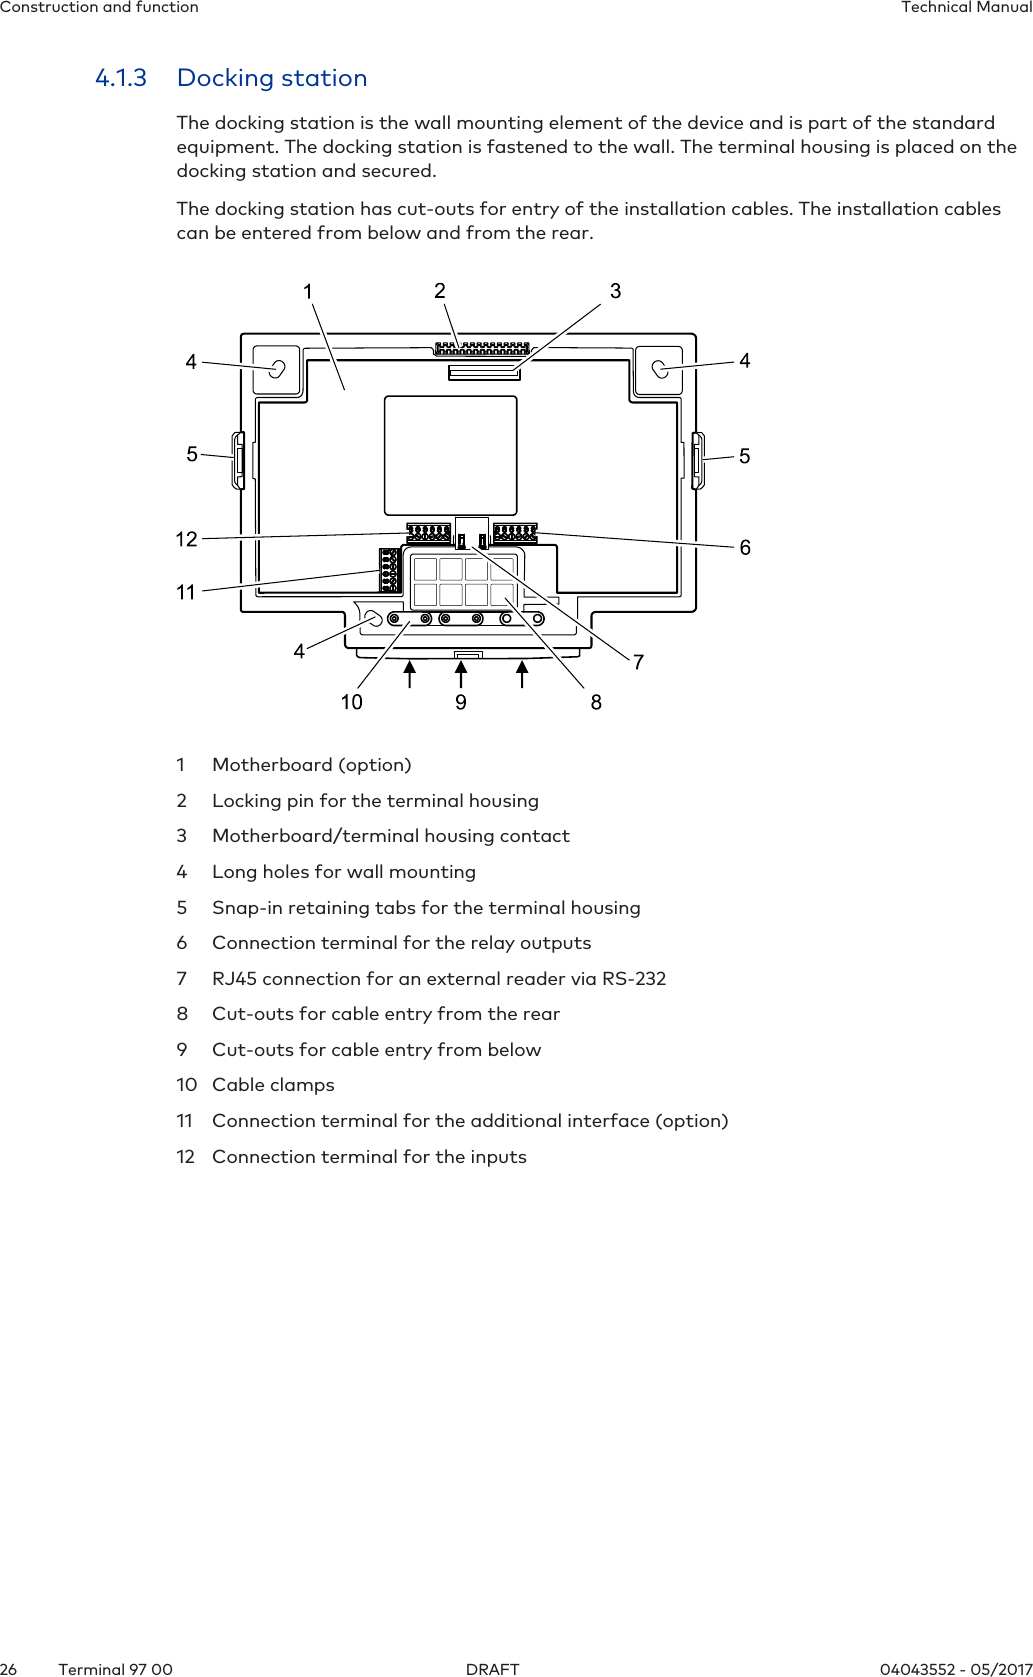 Construction and function Technical Manual26 04043552 - 05/2017Terminal 97 00 DRAFT4.1.3 Docking stationThe docking station is the wall mounting element of the device and is part of the standardequipment. The docking station is fastened to the wall. The terminal housing is placed on thedocking station and secured.The docking station has cut-outs for entry of the installation cables. The installation cablescan be entered from below and from the rear.1 Motherboard (option)2 Locking pin for the terminal housing3 Motherboard/terminal housing contact4 Long holes for wall mounting5 Snap-in retaining tabs for the terminal housing6 Connection terminal for the relay outputs7 RJ45 connection for an external reader via RS-2328 Cut-outs for cable entry from the rear9 Cut-outs for cable entry from below10 Cable clamps11 Connection terminal for the additional interface (option)12 Connection terminal for the inputs